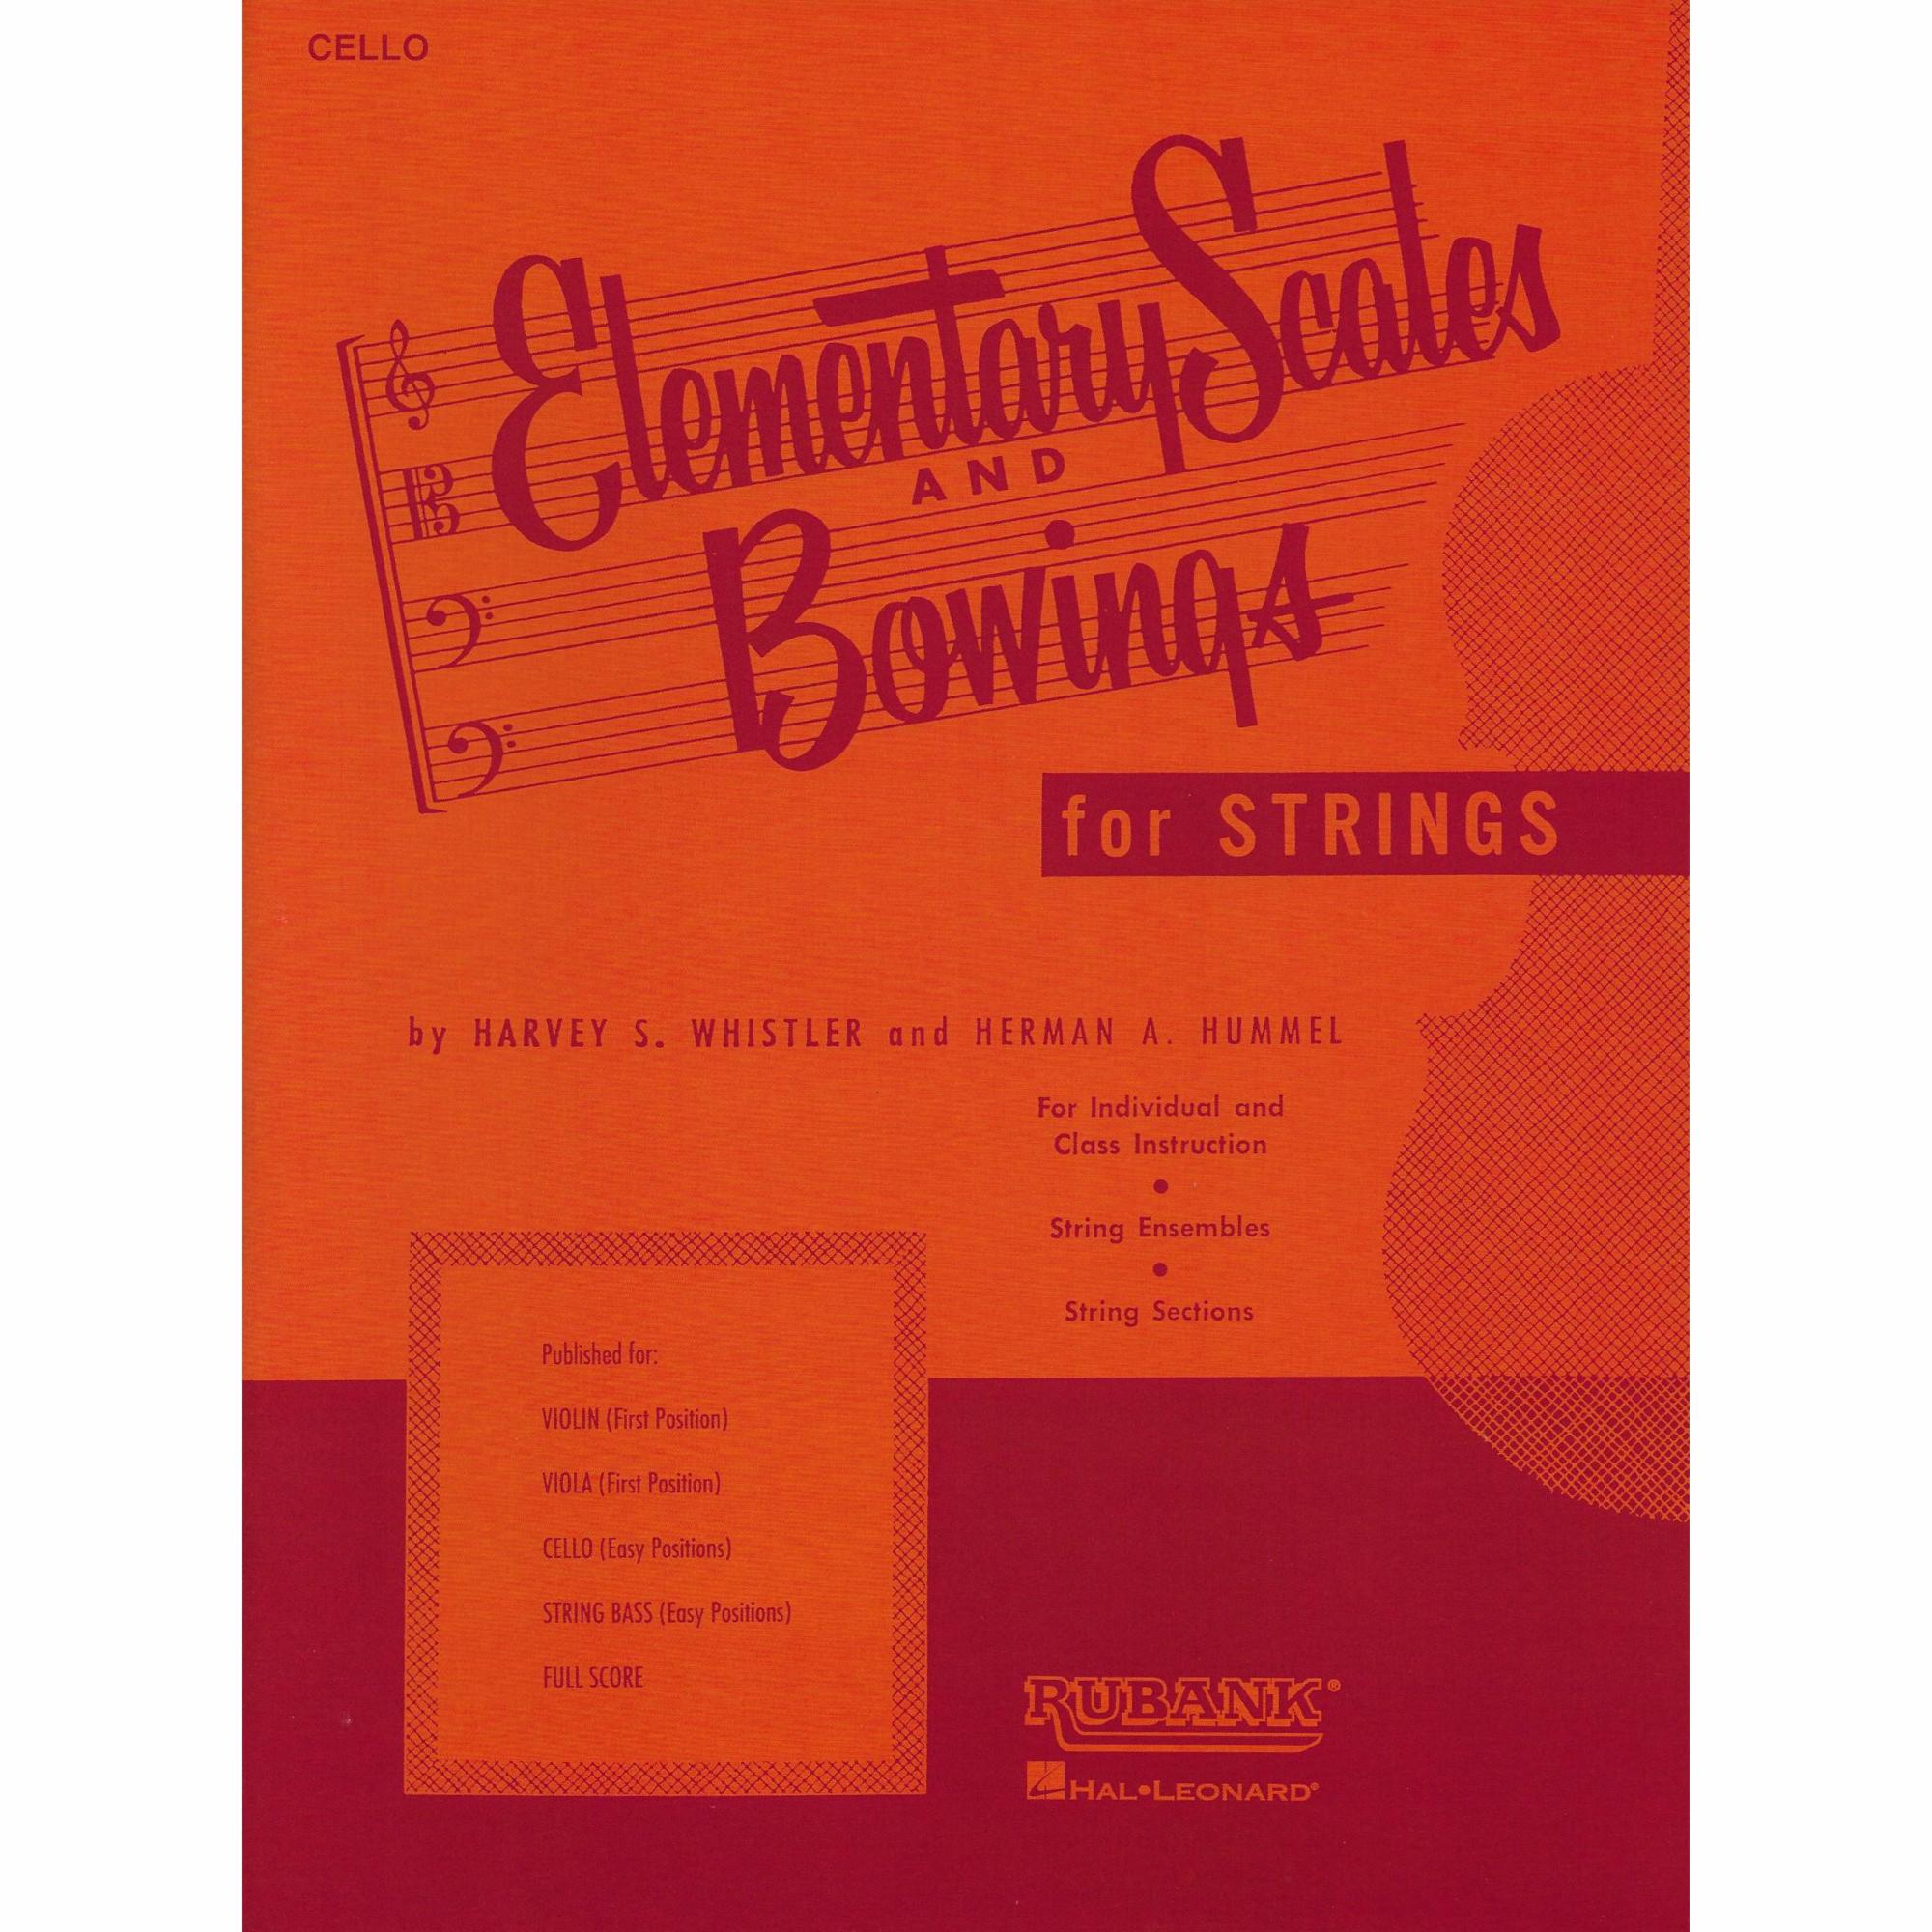 Elementary Scales and Bowings for Cello